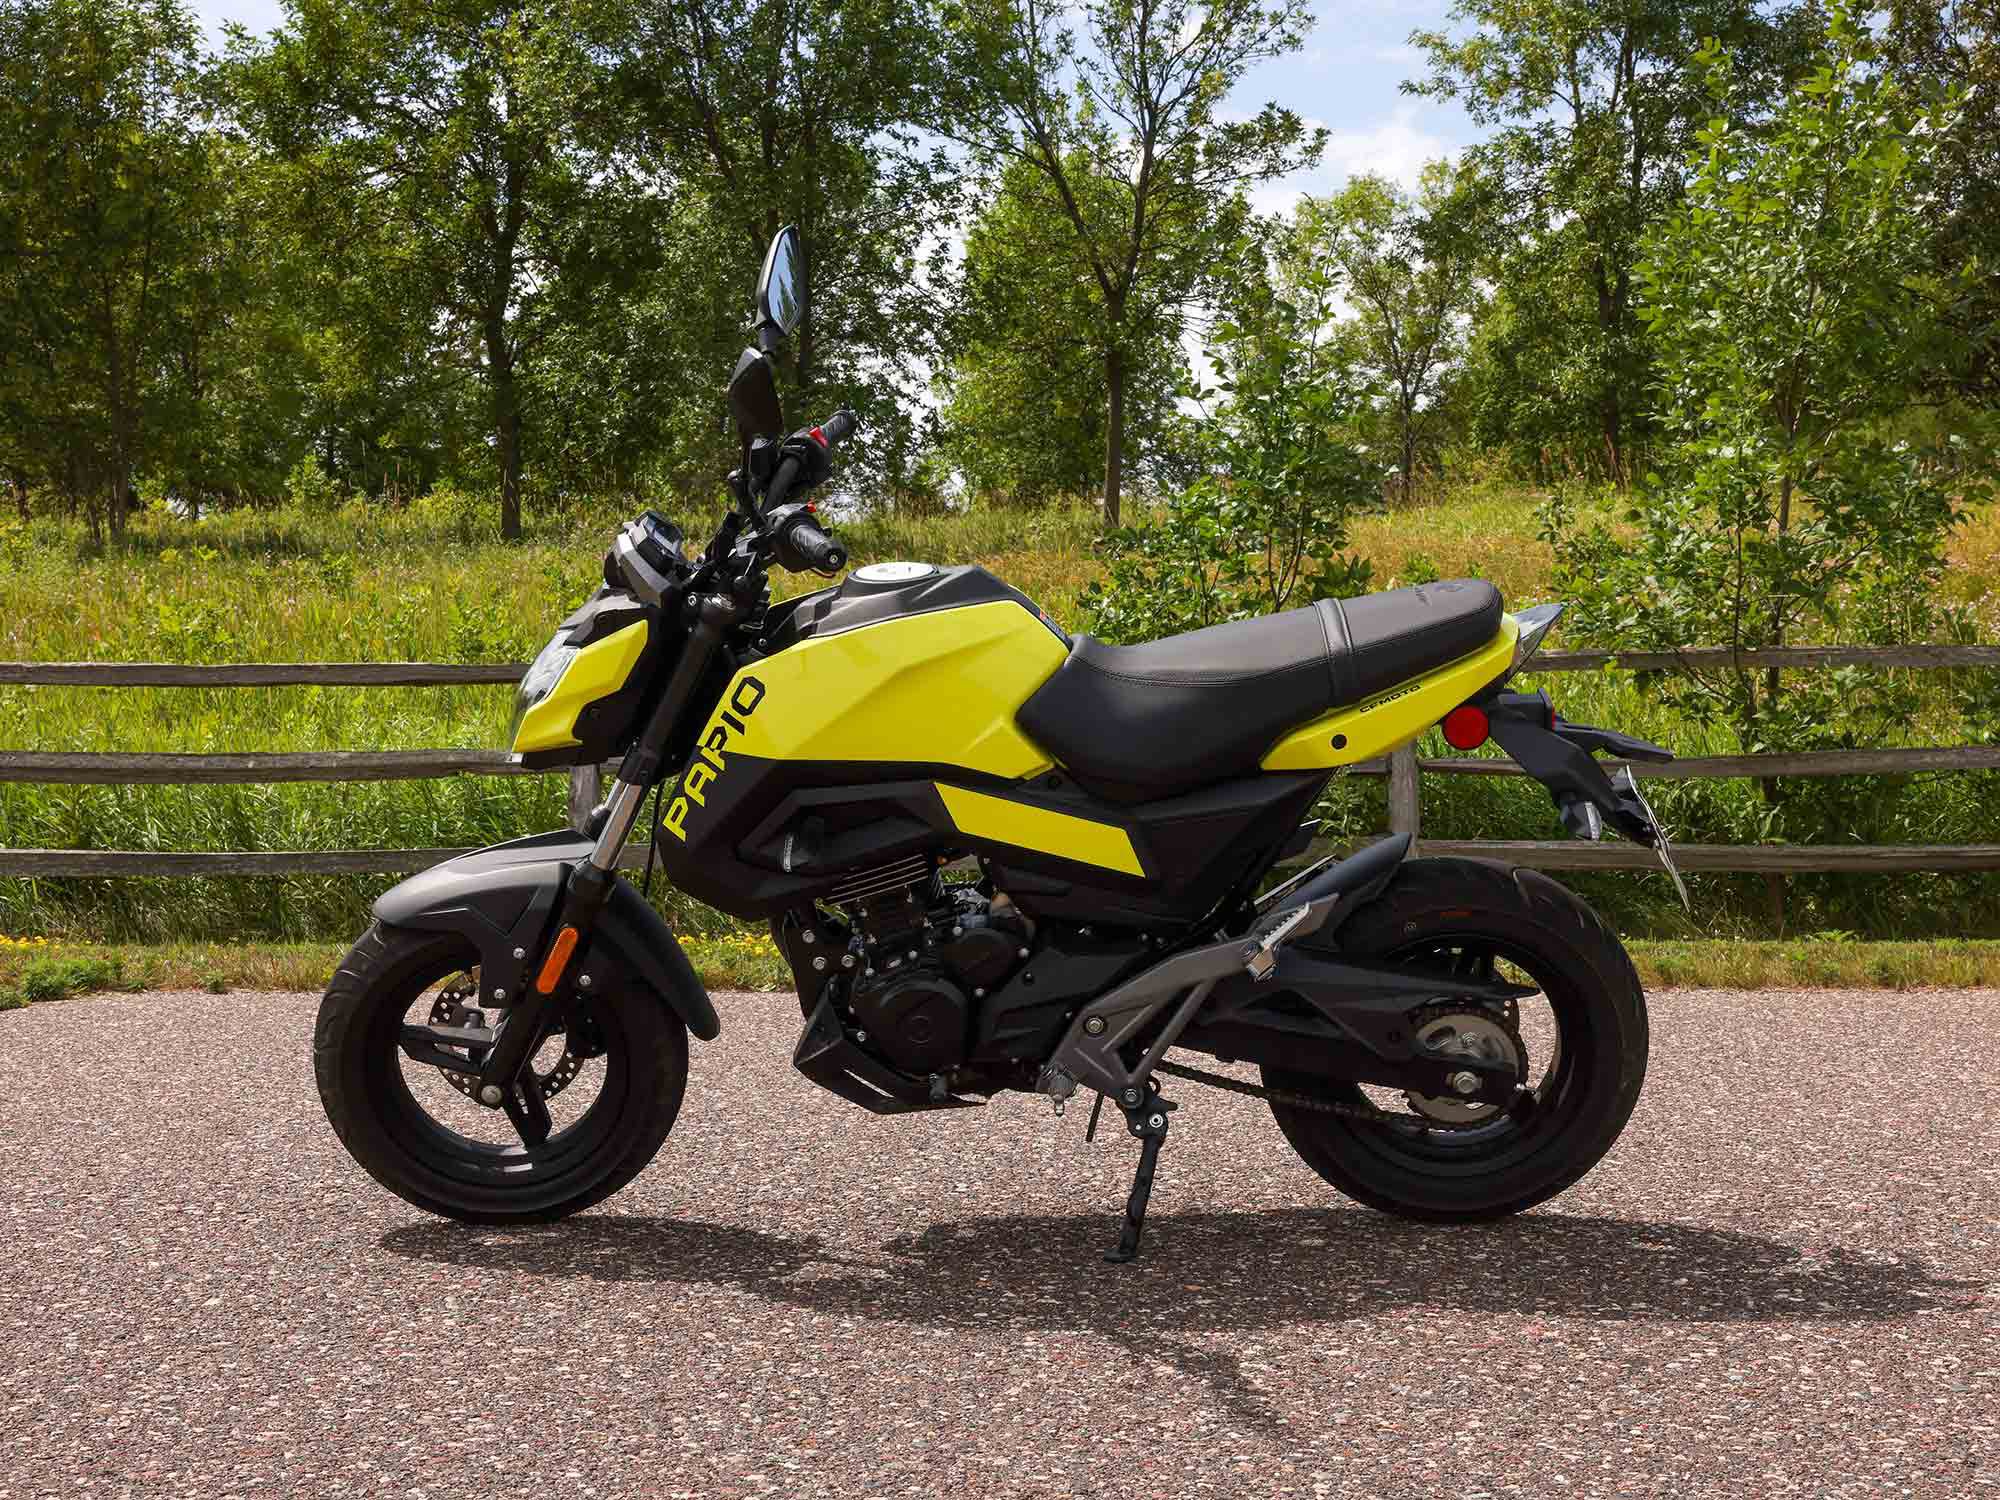 There’s no doubt CFMOTO studied the competition before building the Papio. Styling isn’t far from the Grom or Z125 Pro, and specs mostly align with those two models. The benefit for consumers is a bike that has a slight cost advantage over the competition, but similar looks and feel.